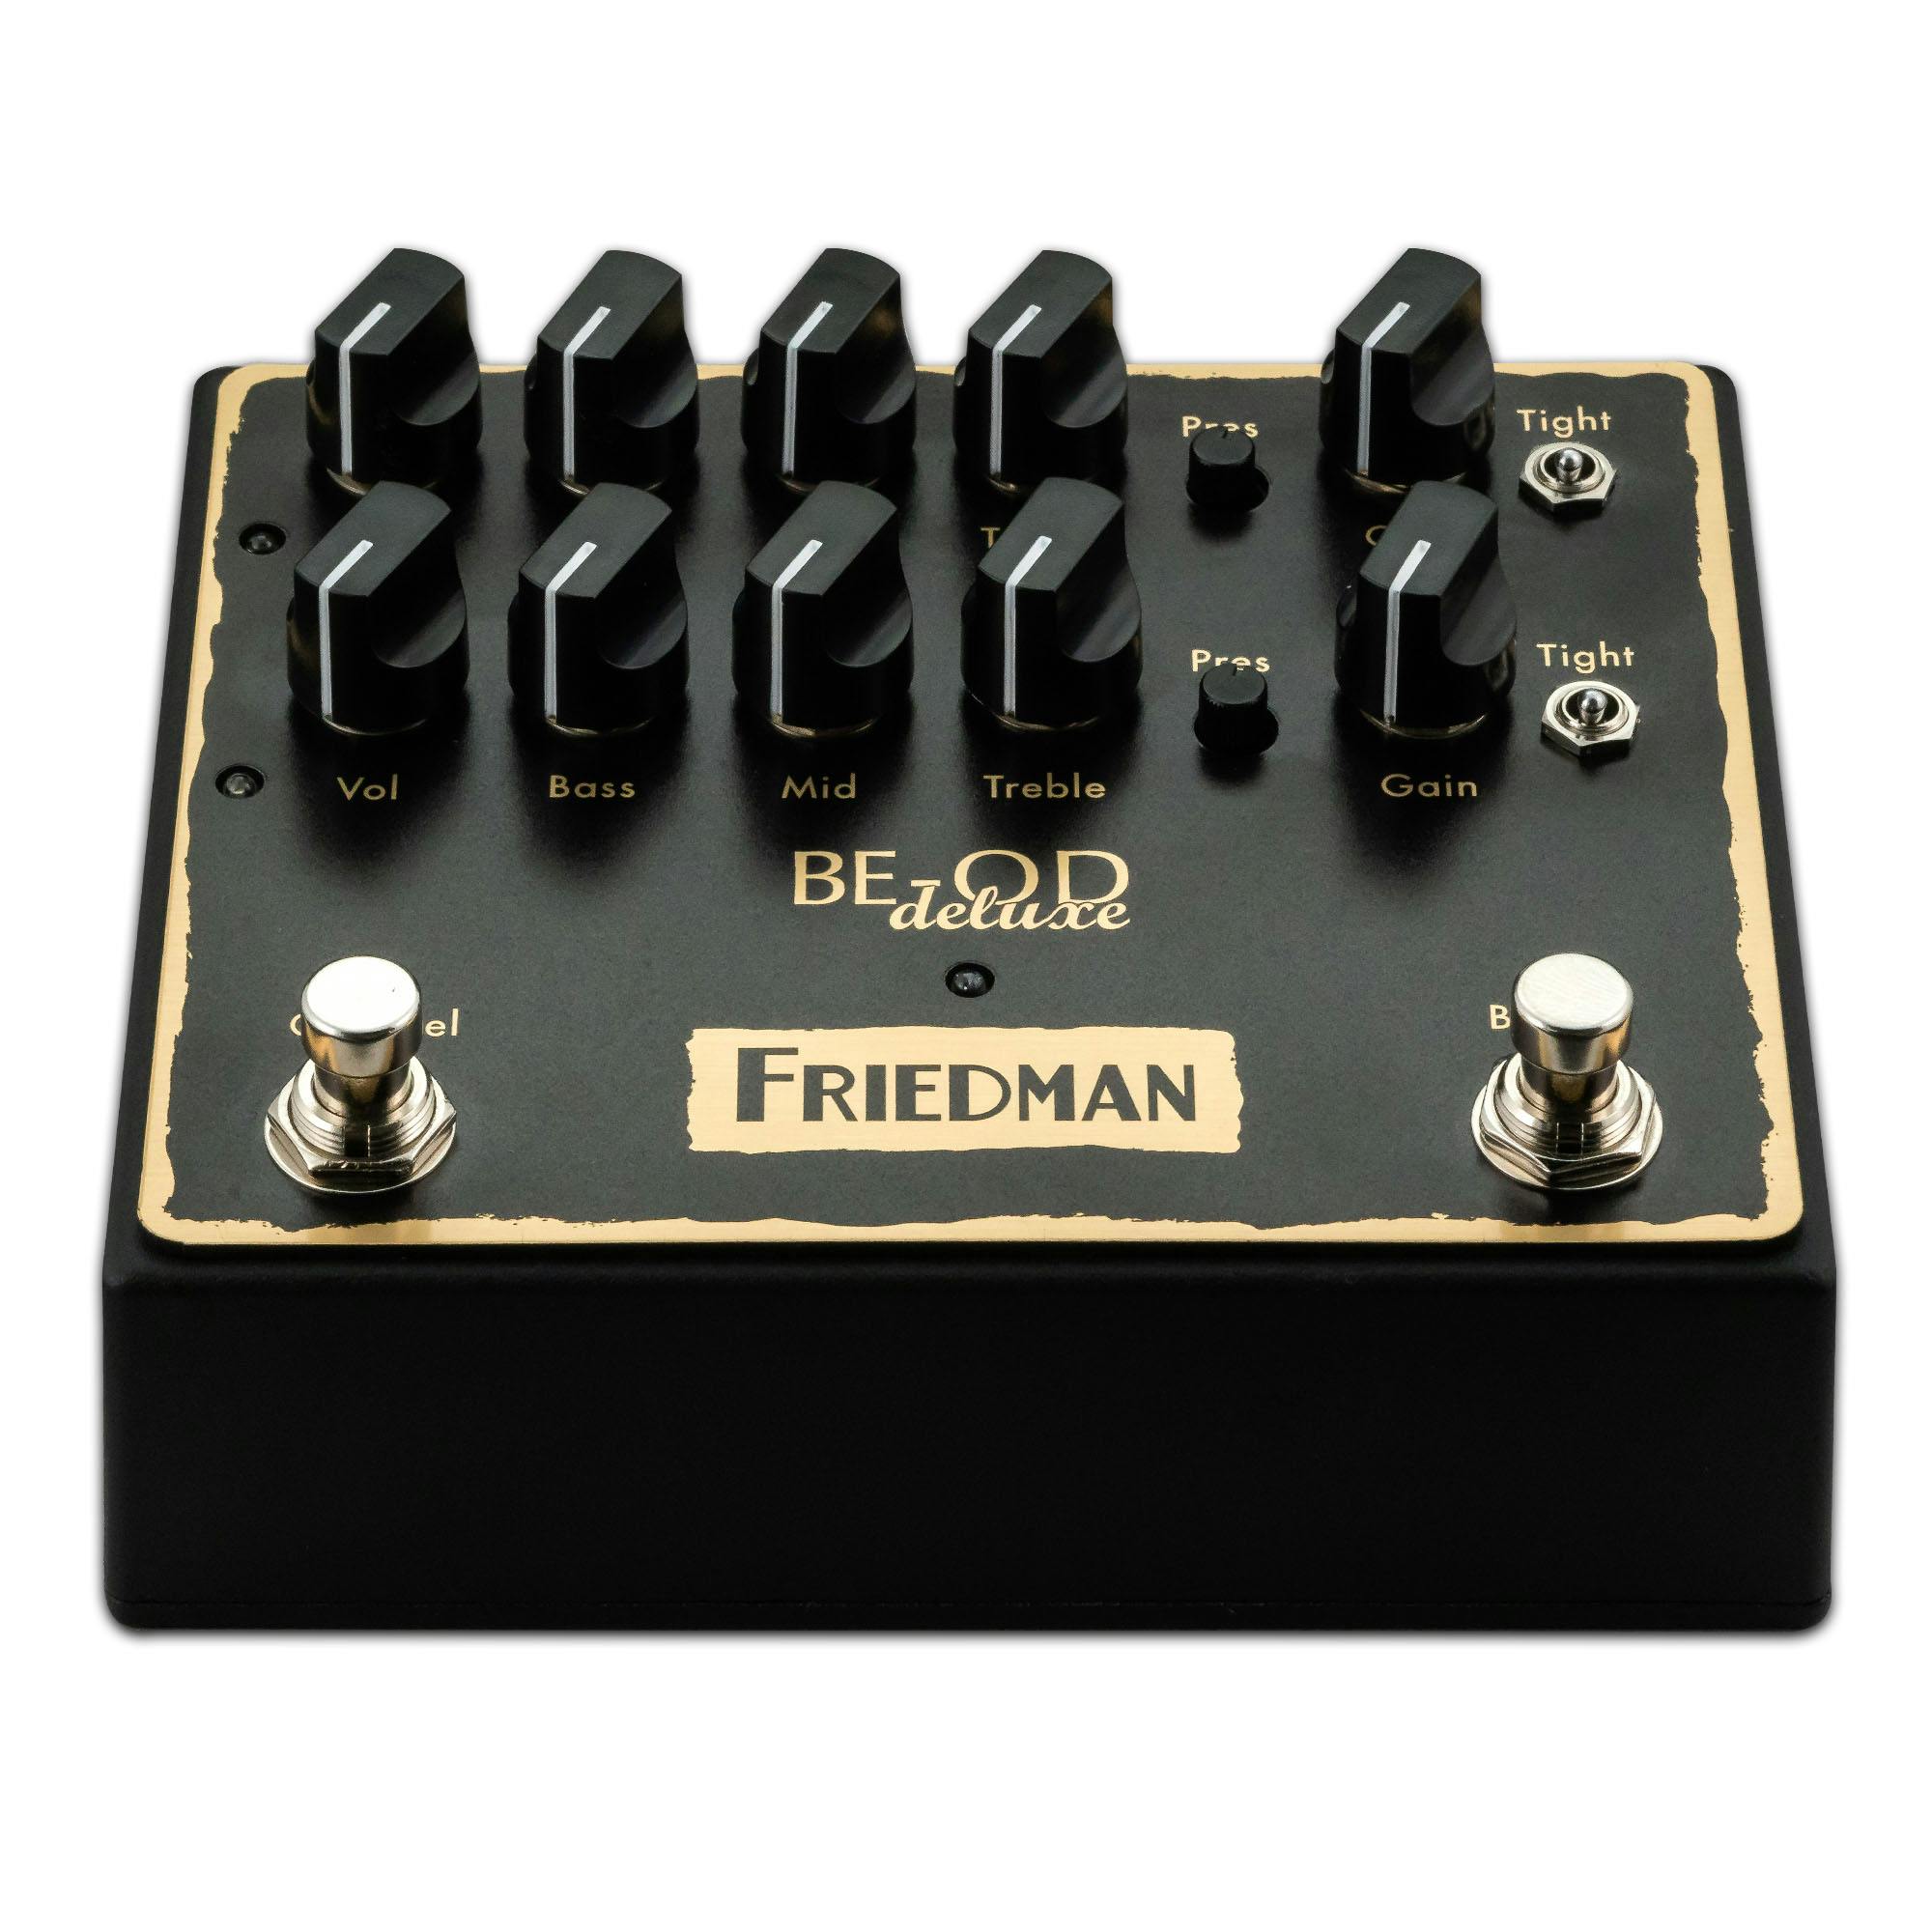 Pedal　Overdrive　Friedman　BE-OD　Deluxe　Andertons　Music　Co.